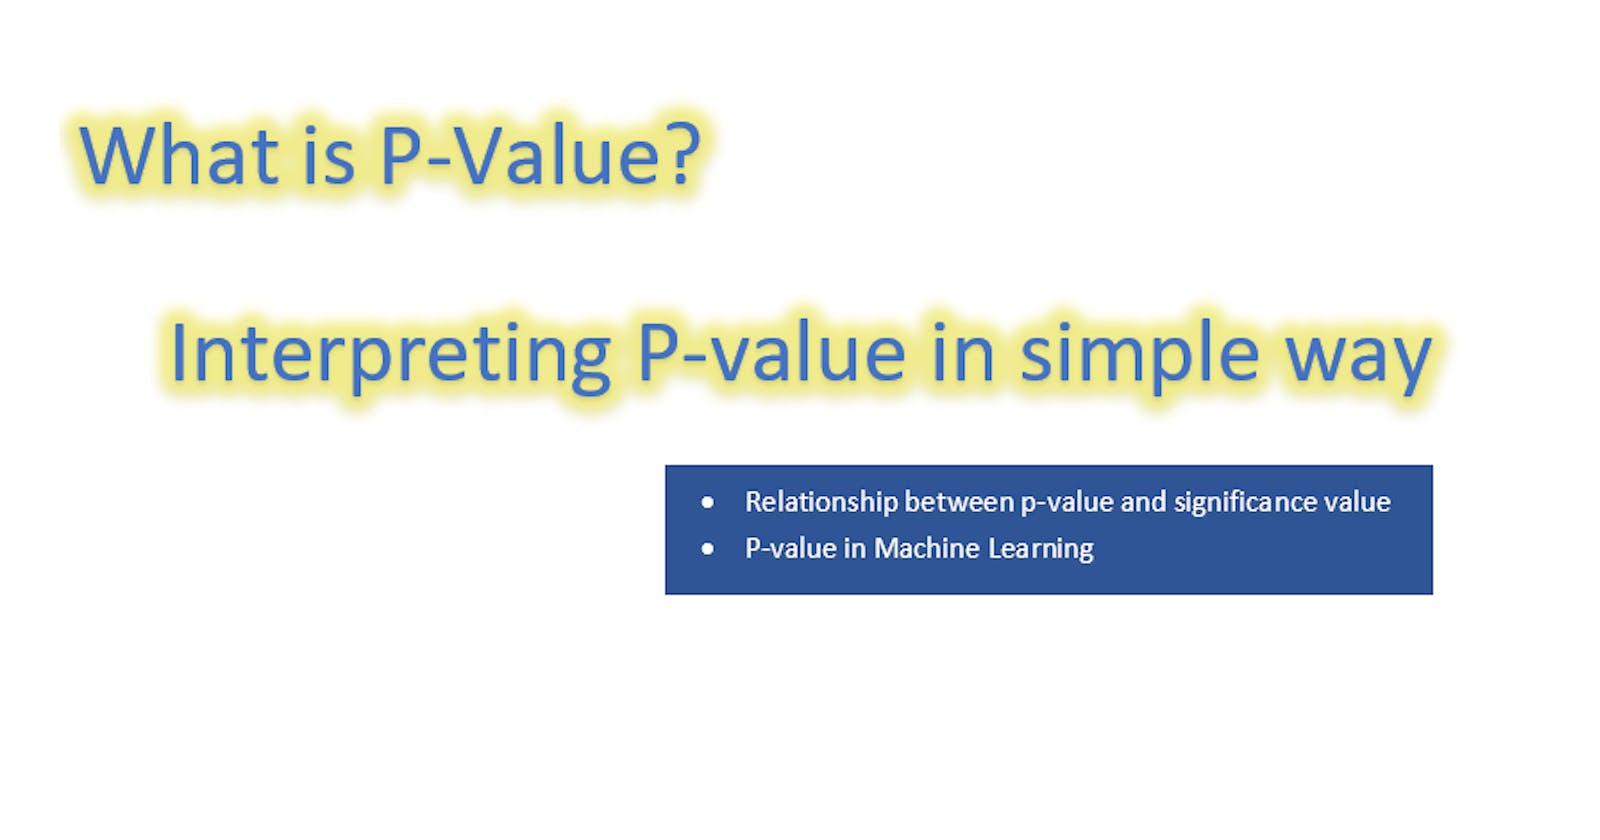 What is P-value? Interpreting the p-value in a simple way